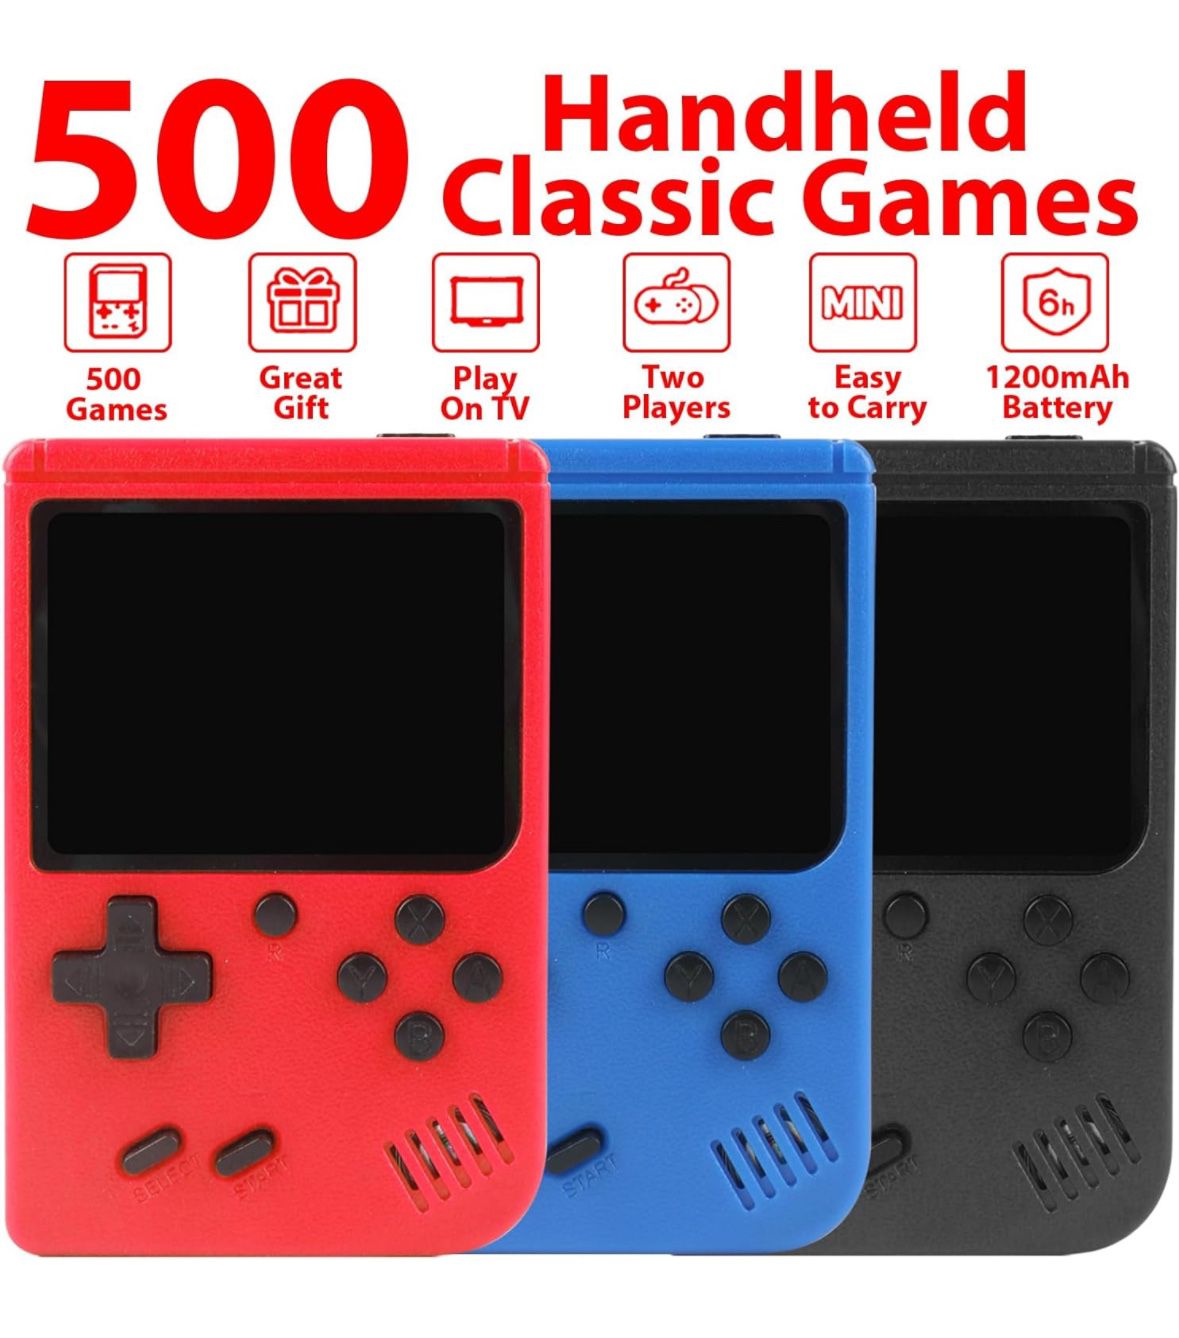 Retro Gaming Console, Handheld Game Console with 500 Classical Games Portable Hand Held Video Game Pocket Console for Kids & Adult Two Players Support